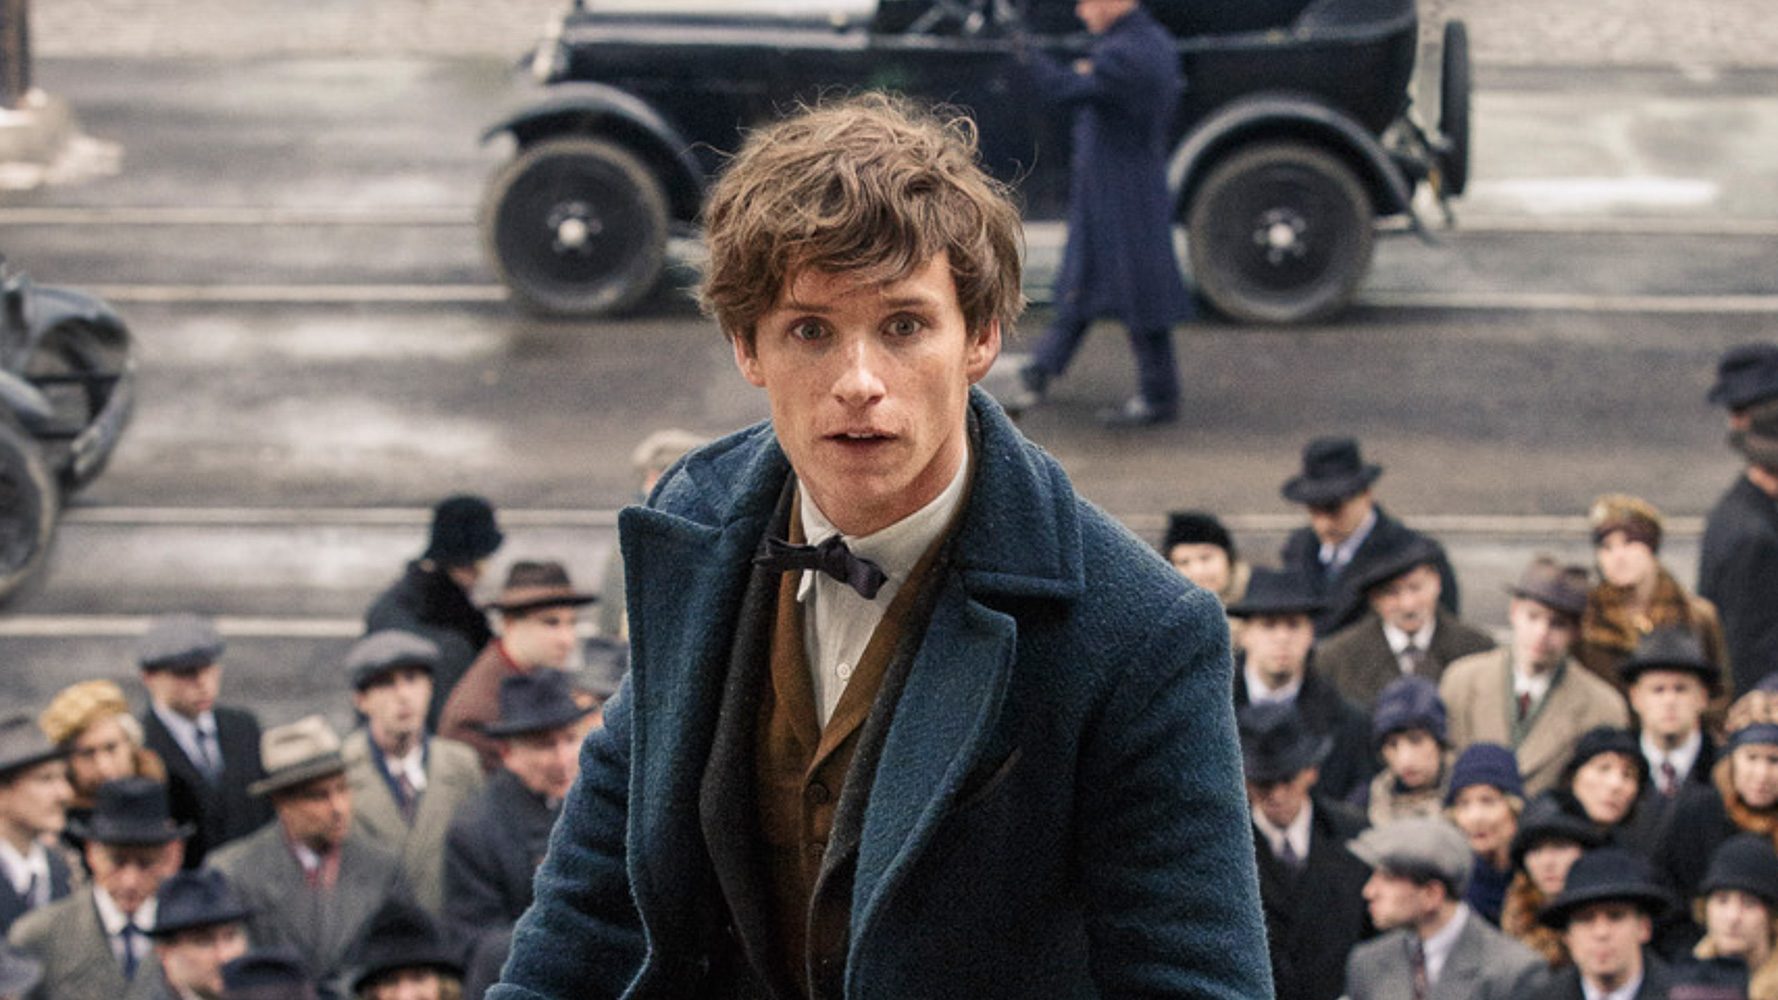 WATCH: Behind the scenes of ‘Fantastic Beasts And Where To Find Them’